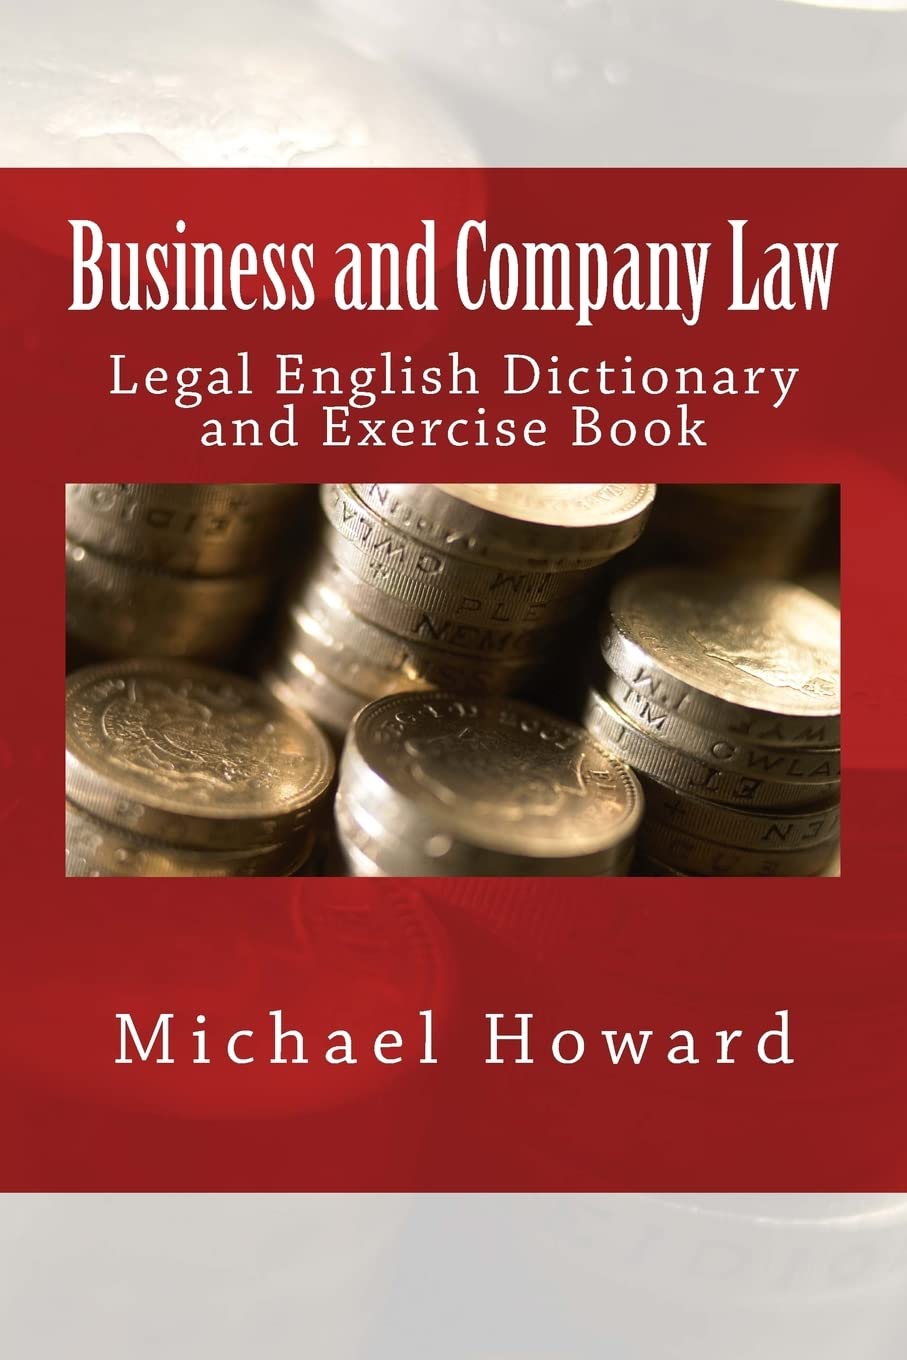 Business and Company Law SureShot Books